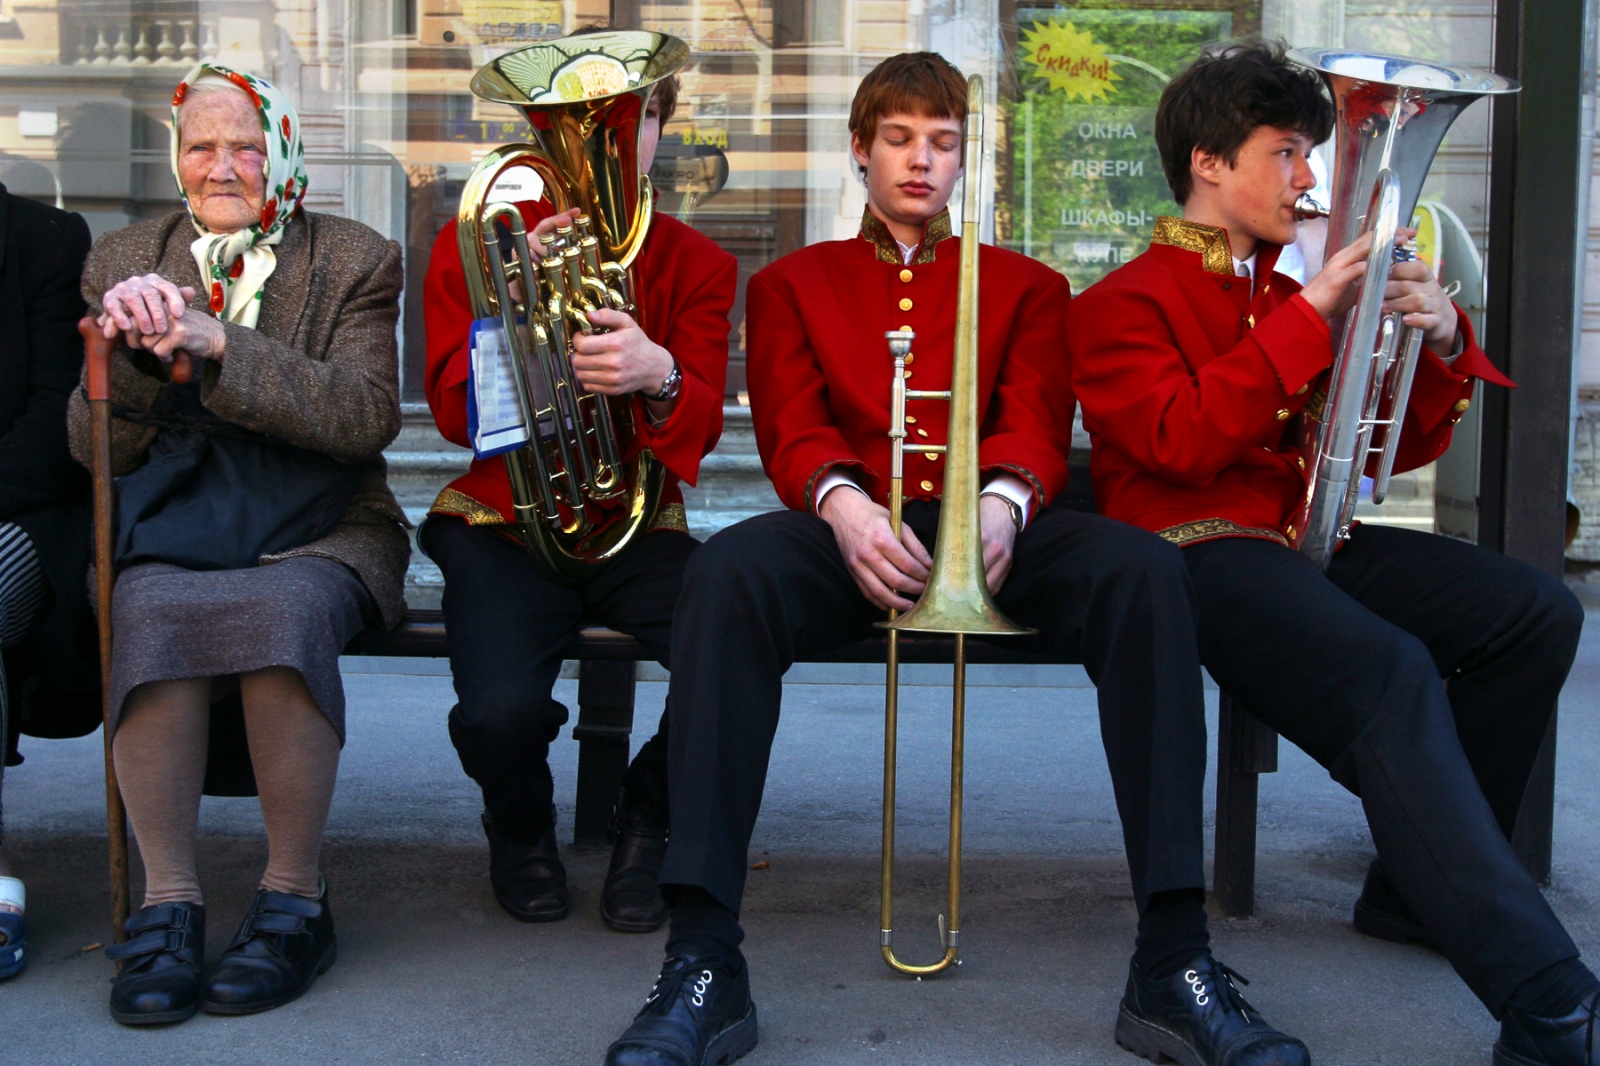 Russia - St. Petersburg Celebrates -                 Exhausted band members wait at a bus stop...